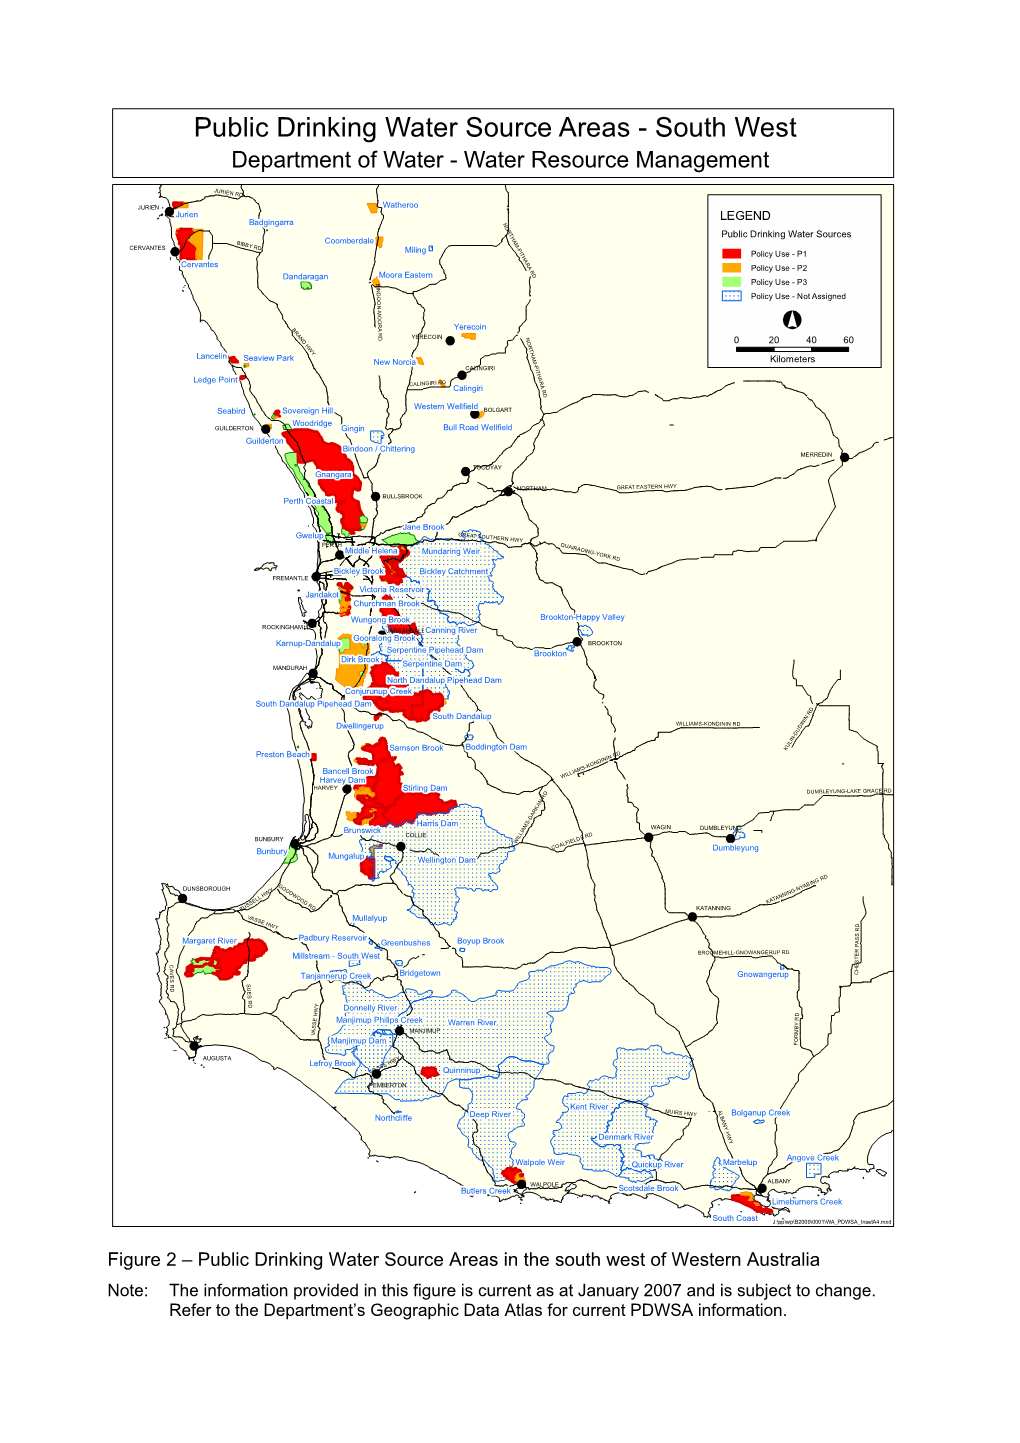 Public Drinking Water Source Areas - South West Department of Water - Water Resource Management